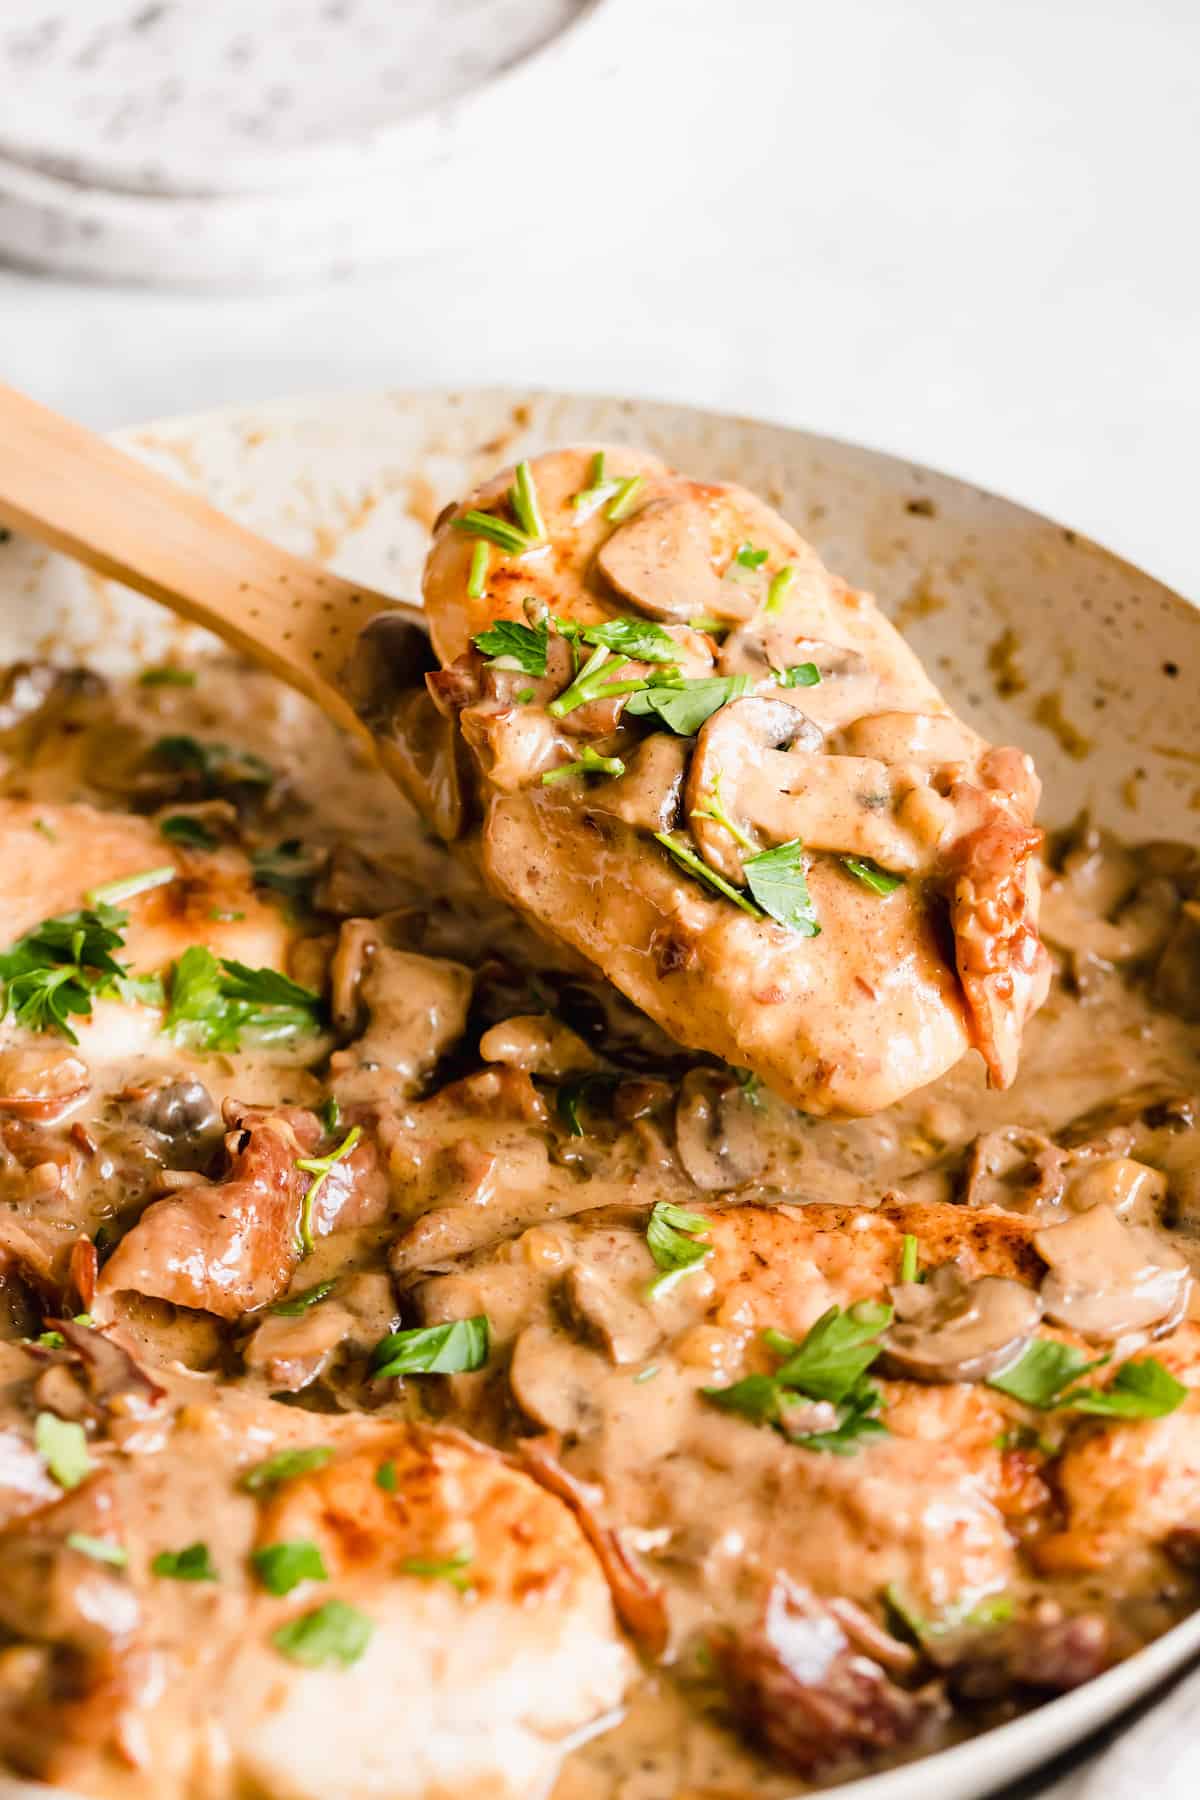 A piece of chicken in creamy marsala sauce on a wooden serving spoon.